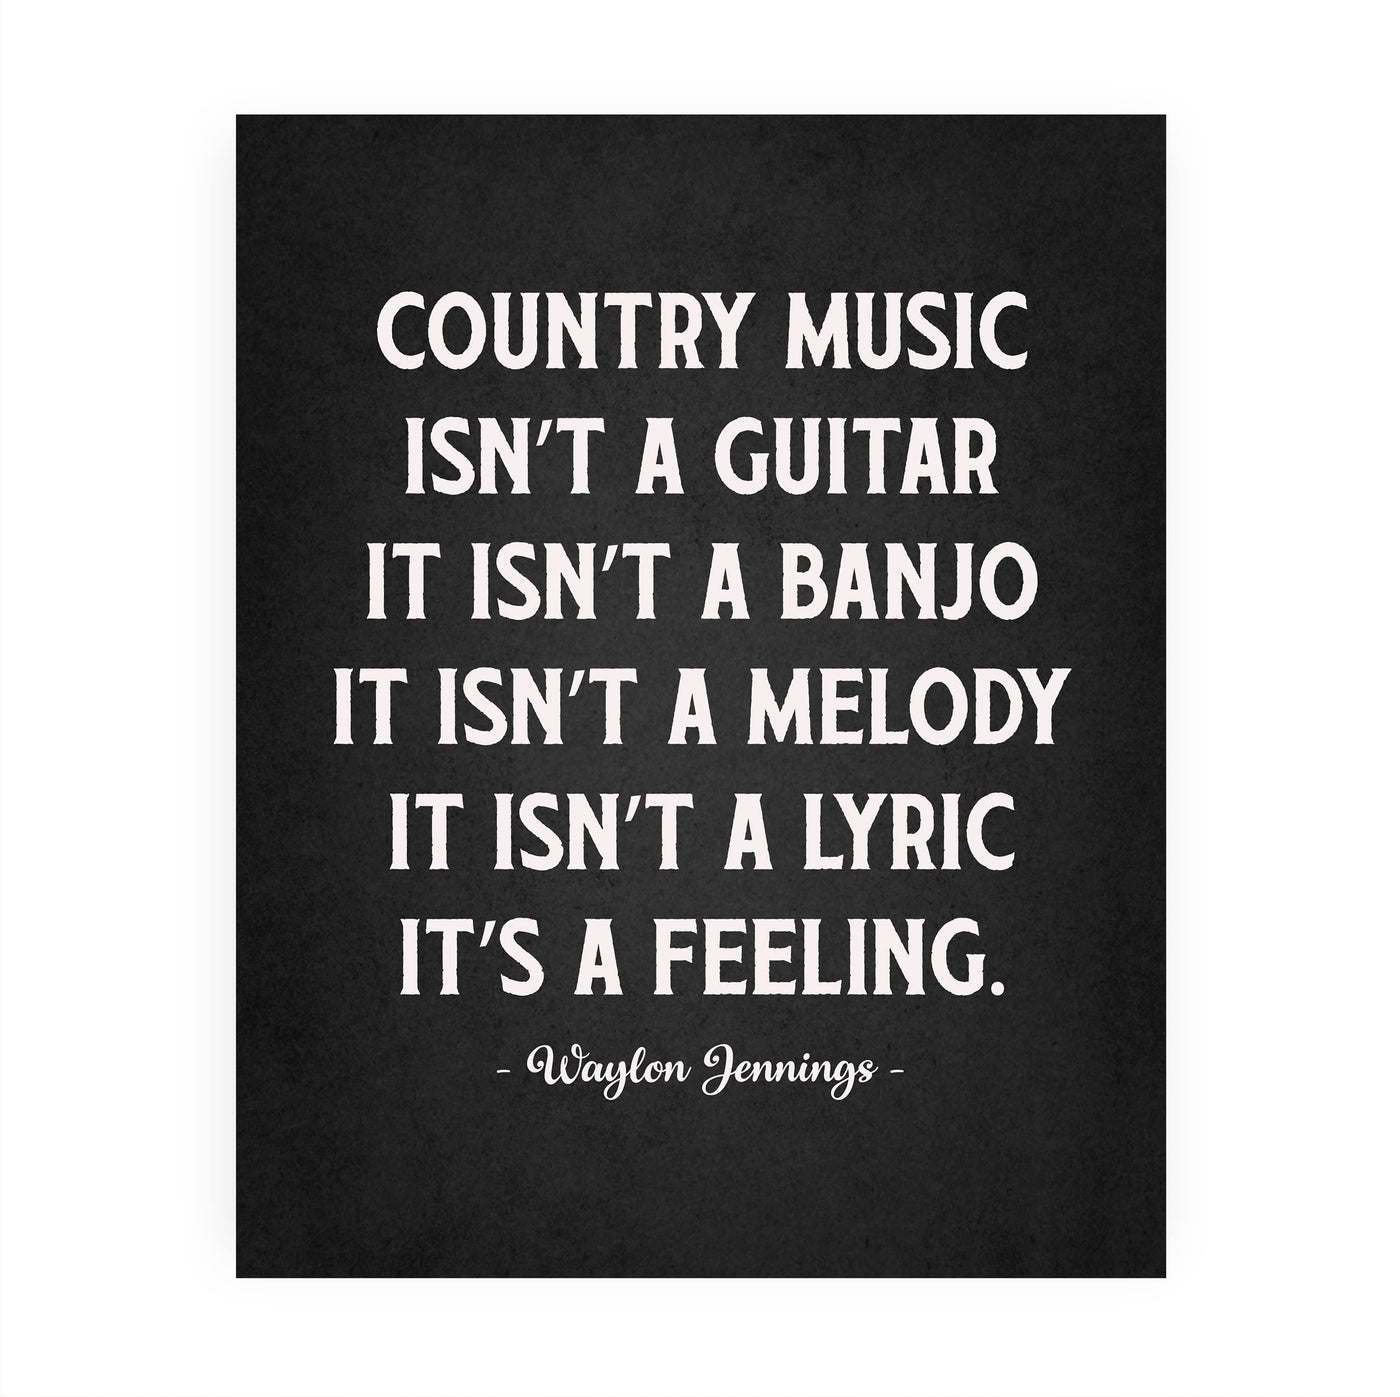 Country Music Is a Feeling Famous Country Music Legends Quotes -8 x10" Rustic Quote Poster Print -Ready to Frame. Perfect for Home-Office-Studio-Bar-Man Cave Decor. Great Gift for All Waylon Fans!